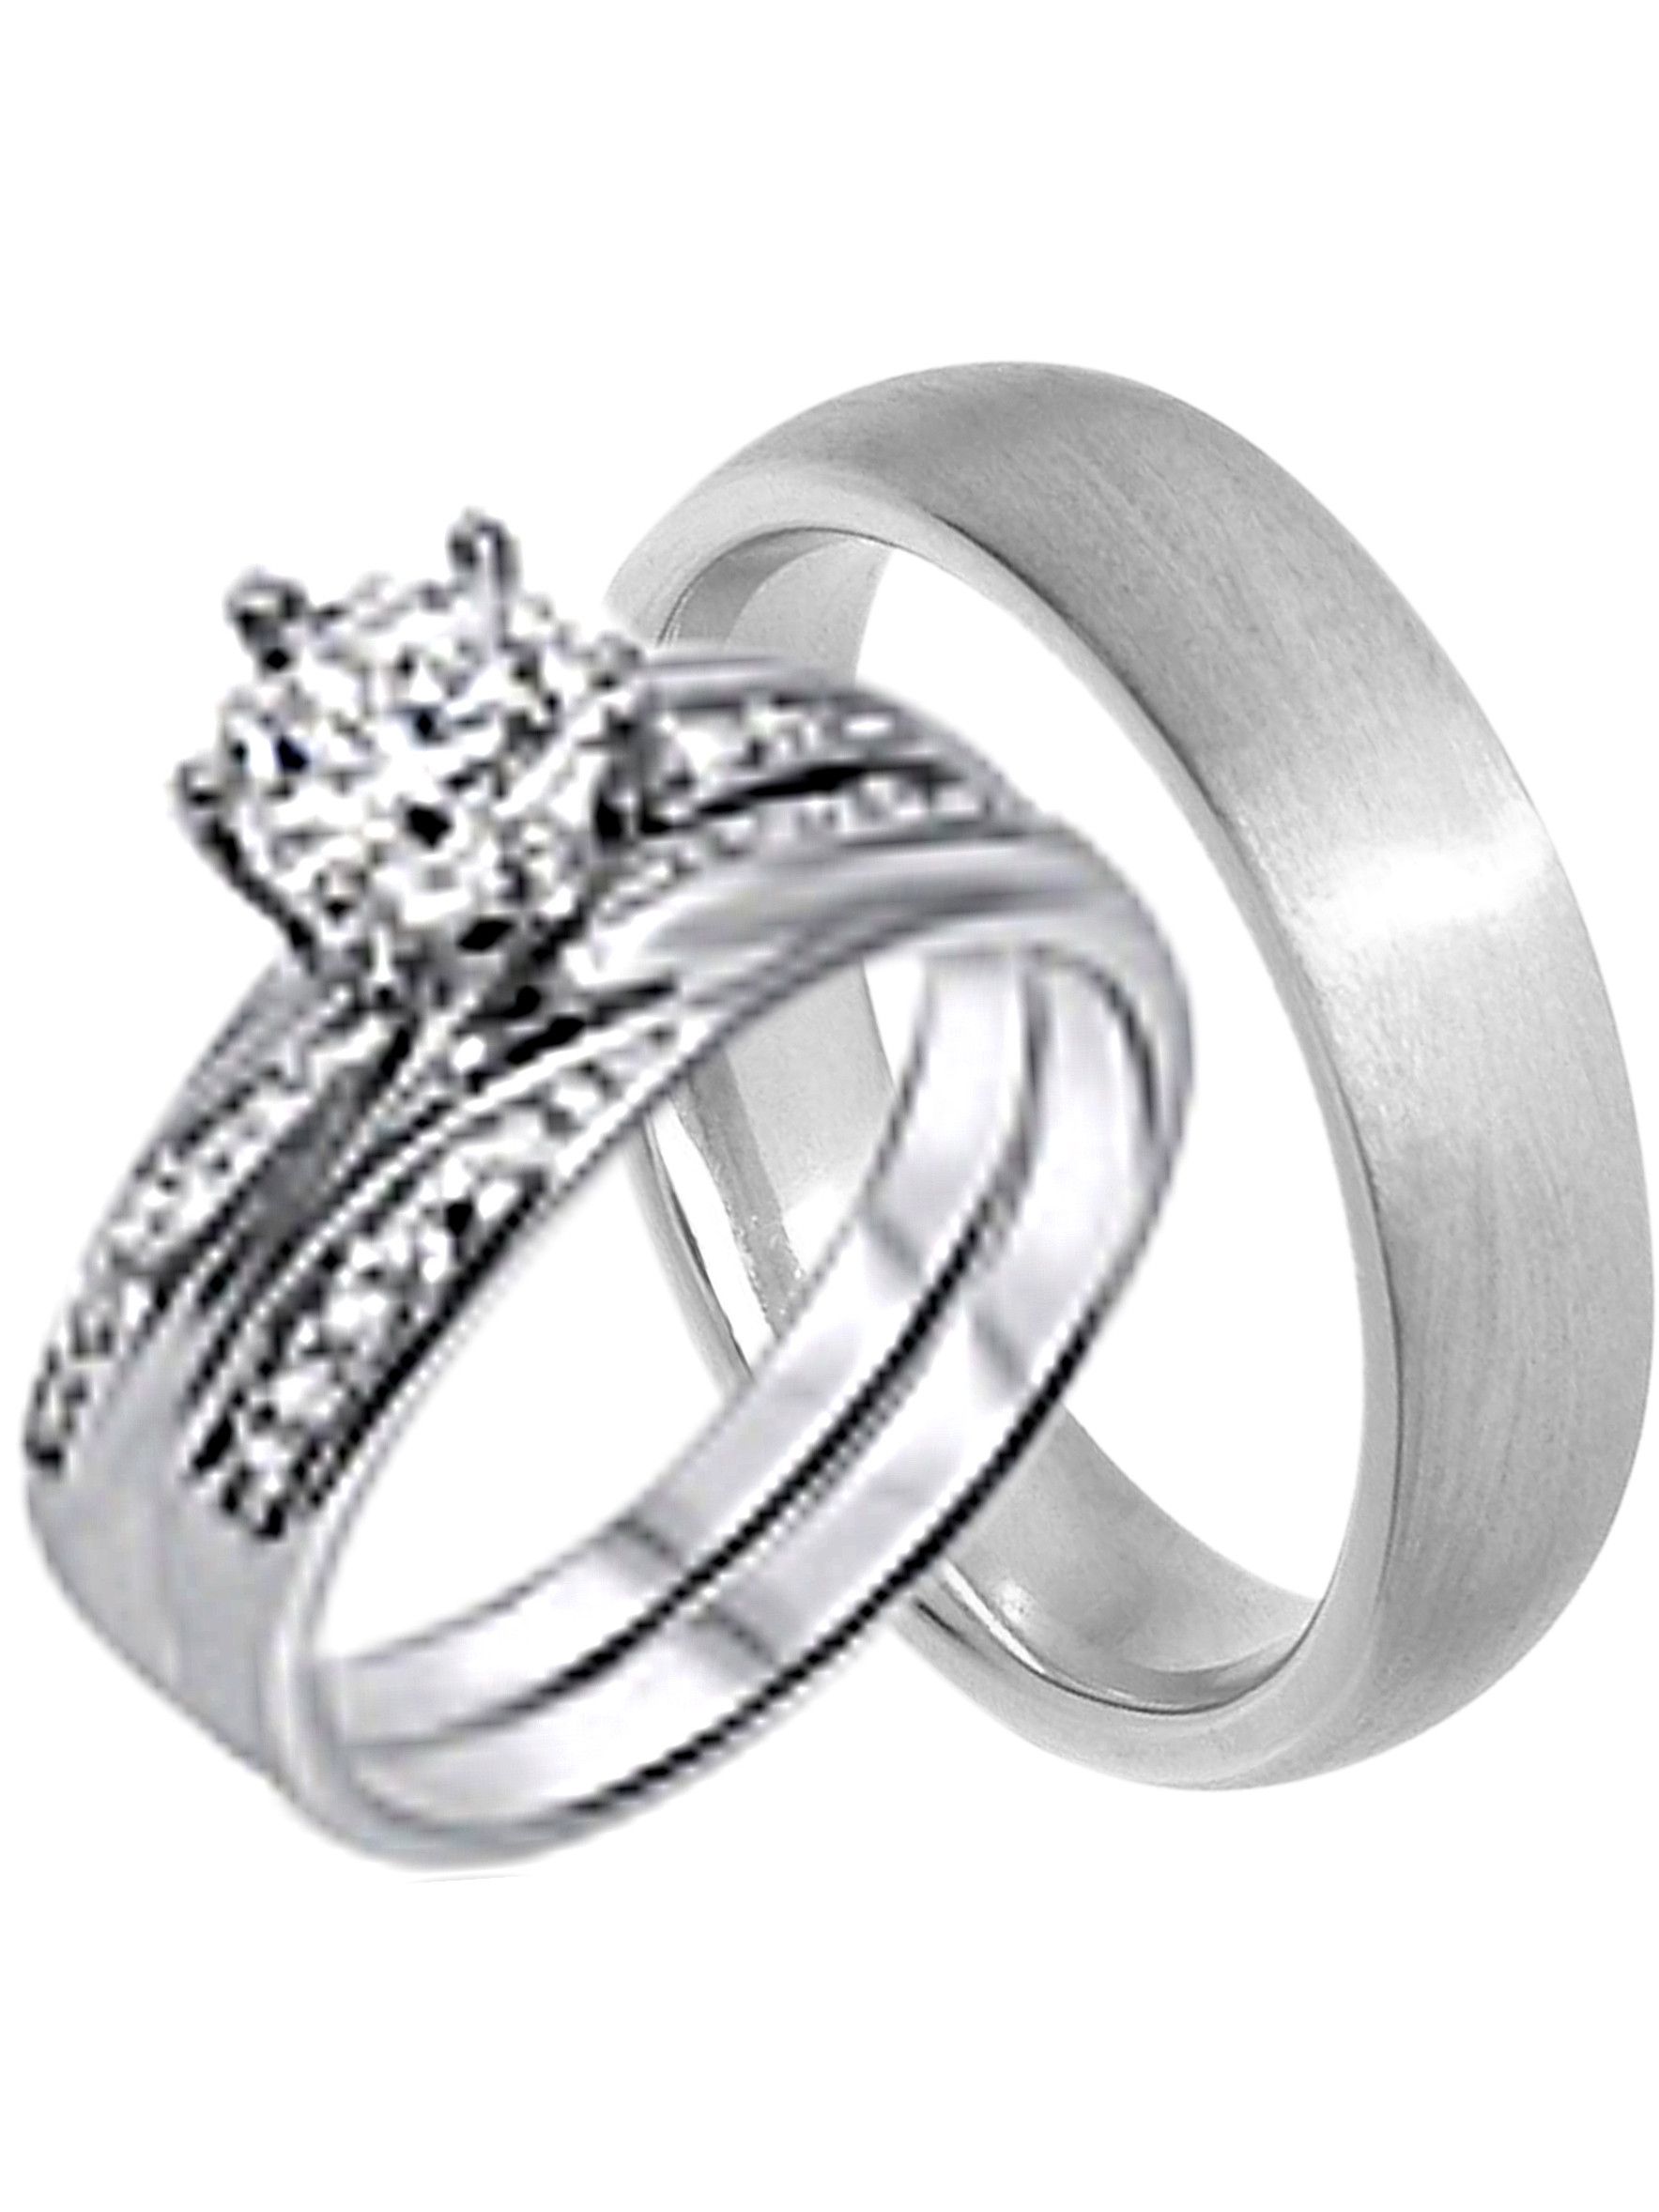 Wedding Ring Sets For Her And Him
 His and Hers Wedding Ring Set Cheap Wedding Bands for Him